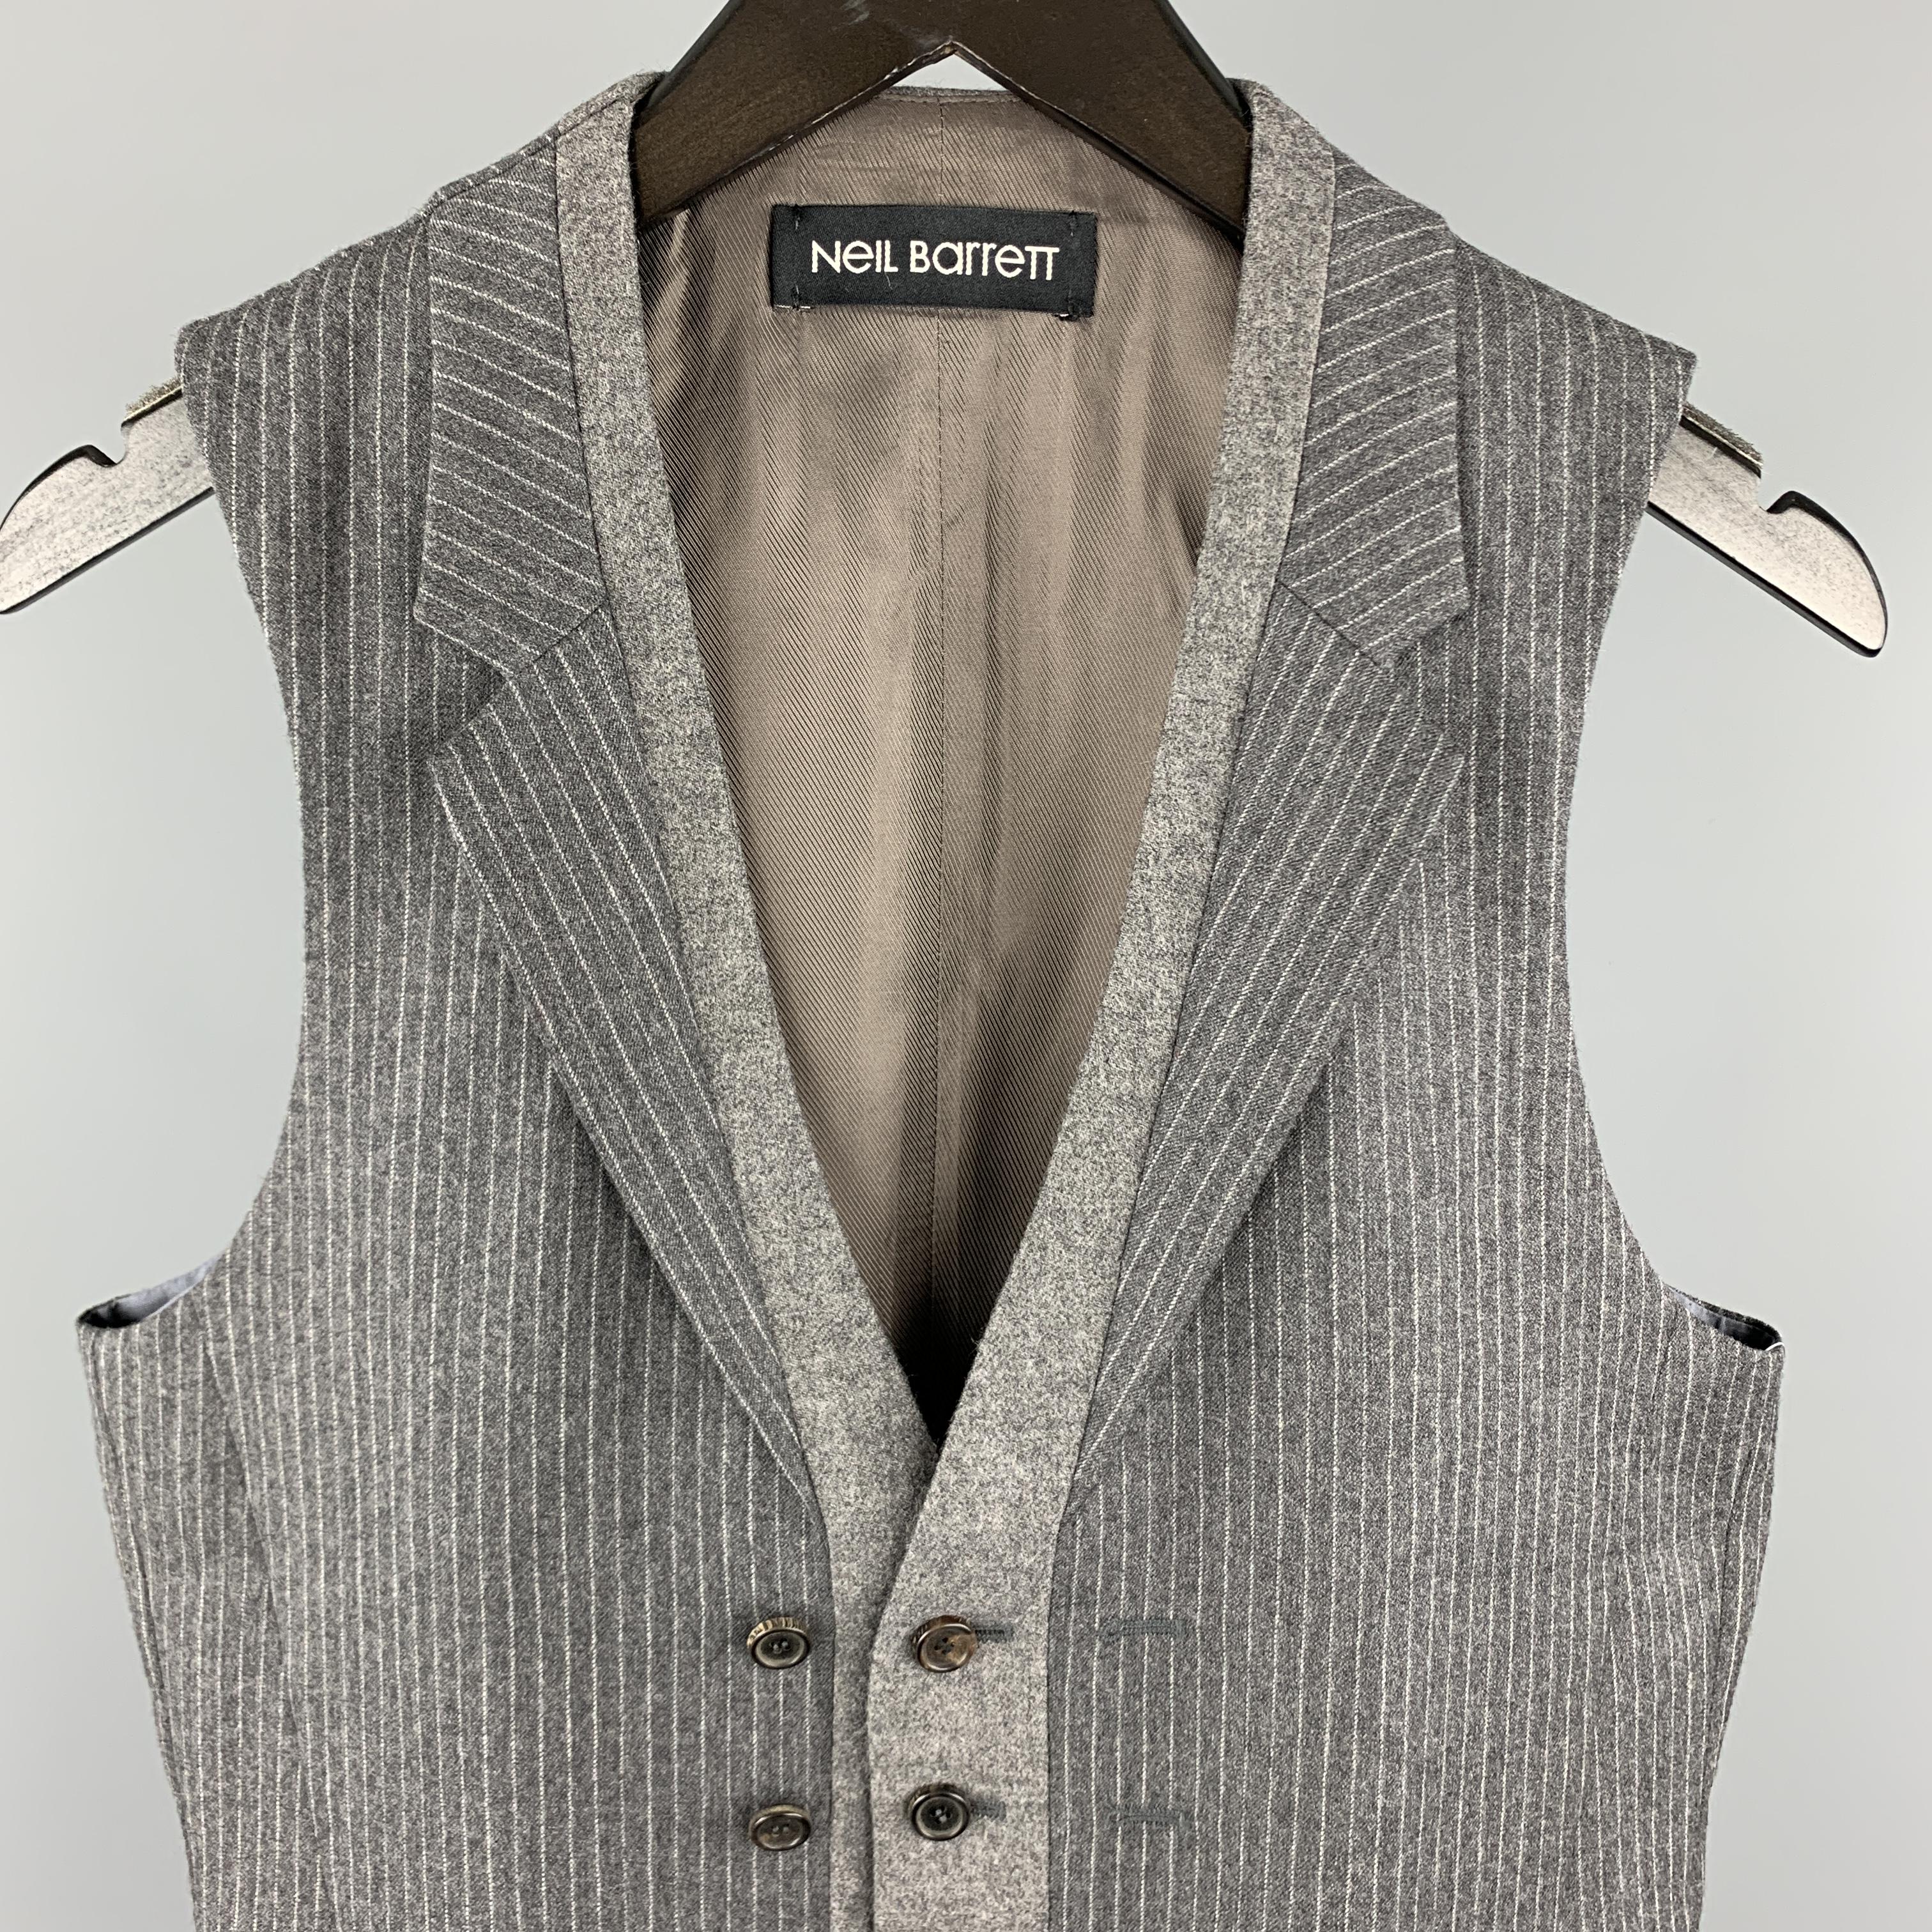 NEIL BARRET vest comes in a gray stripe wool material, with a notch lapel, a solid grey trim, a double buttoned front, and slit pockets. 

Excellent Pre-Owned Condition.
Marked: S

Measurements:

Shoulder: 13 in. 
Chest: 37 in. 
Length: 26 in.